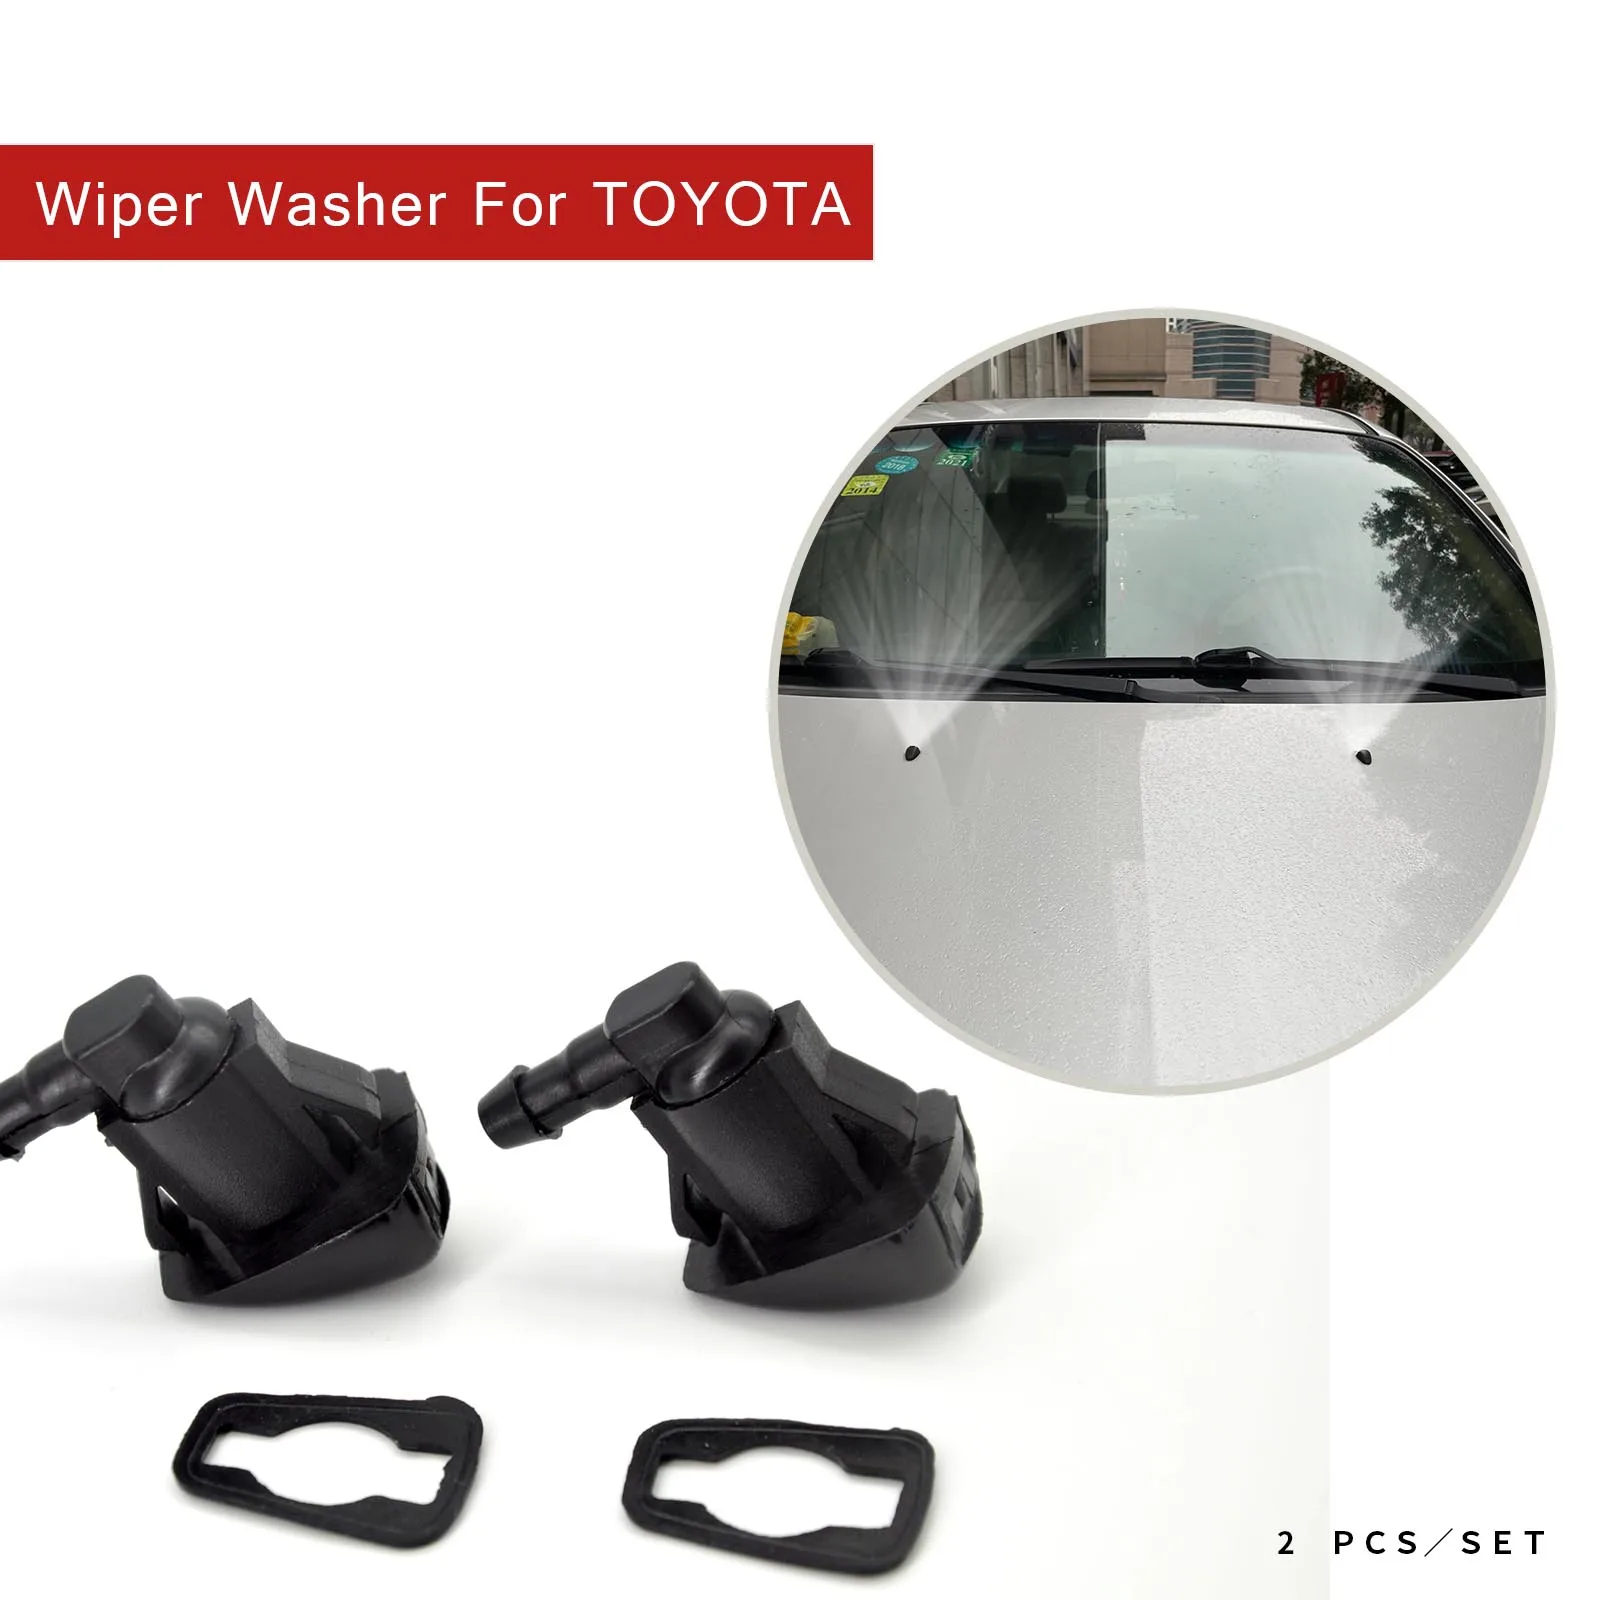 

Car Front Windshield Washer Nozzles Replacement for Toyota Sienna 04-10 Corolla Solara Tundra Replaces OE# 85381-AE020 Spray Jet